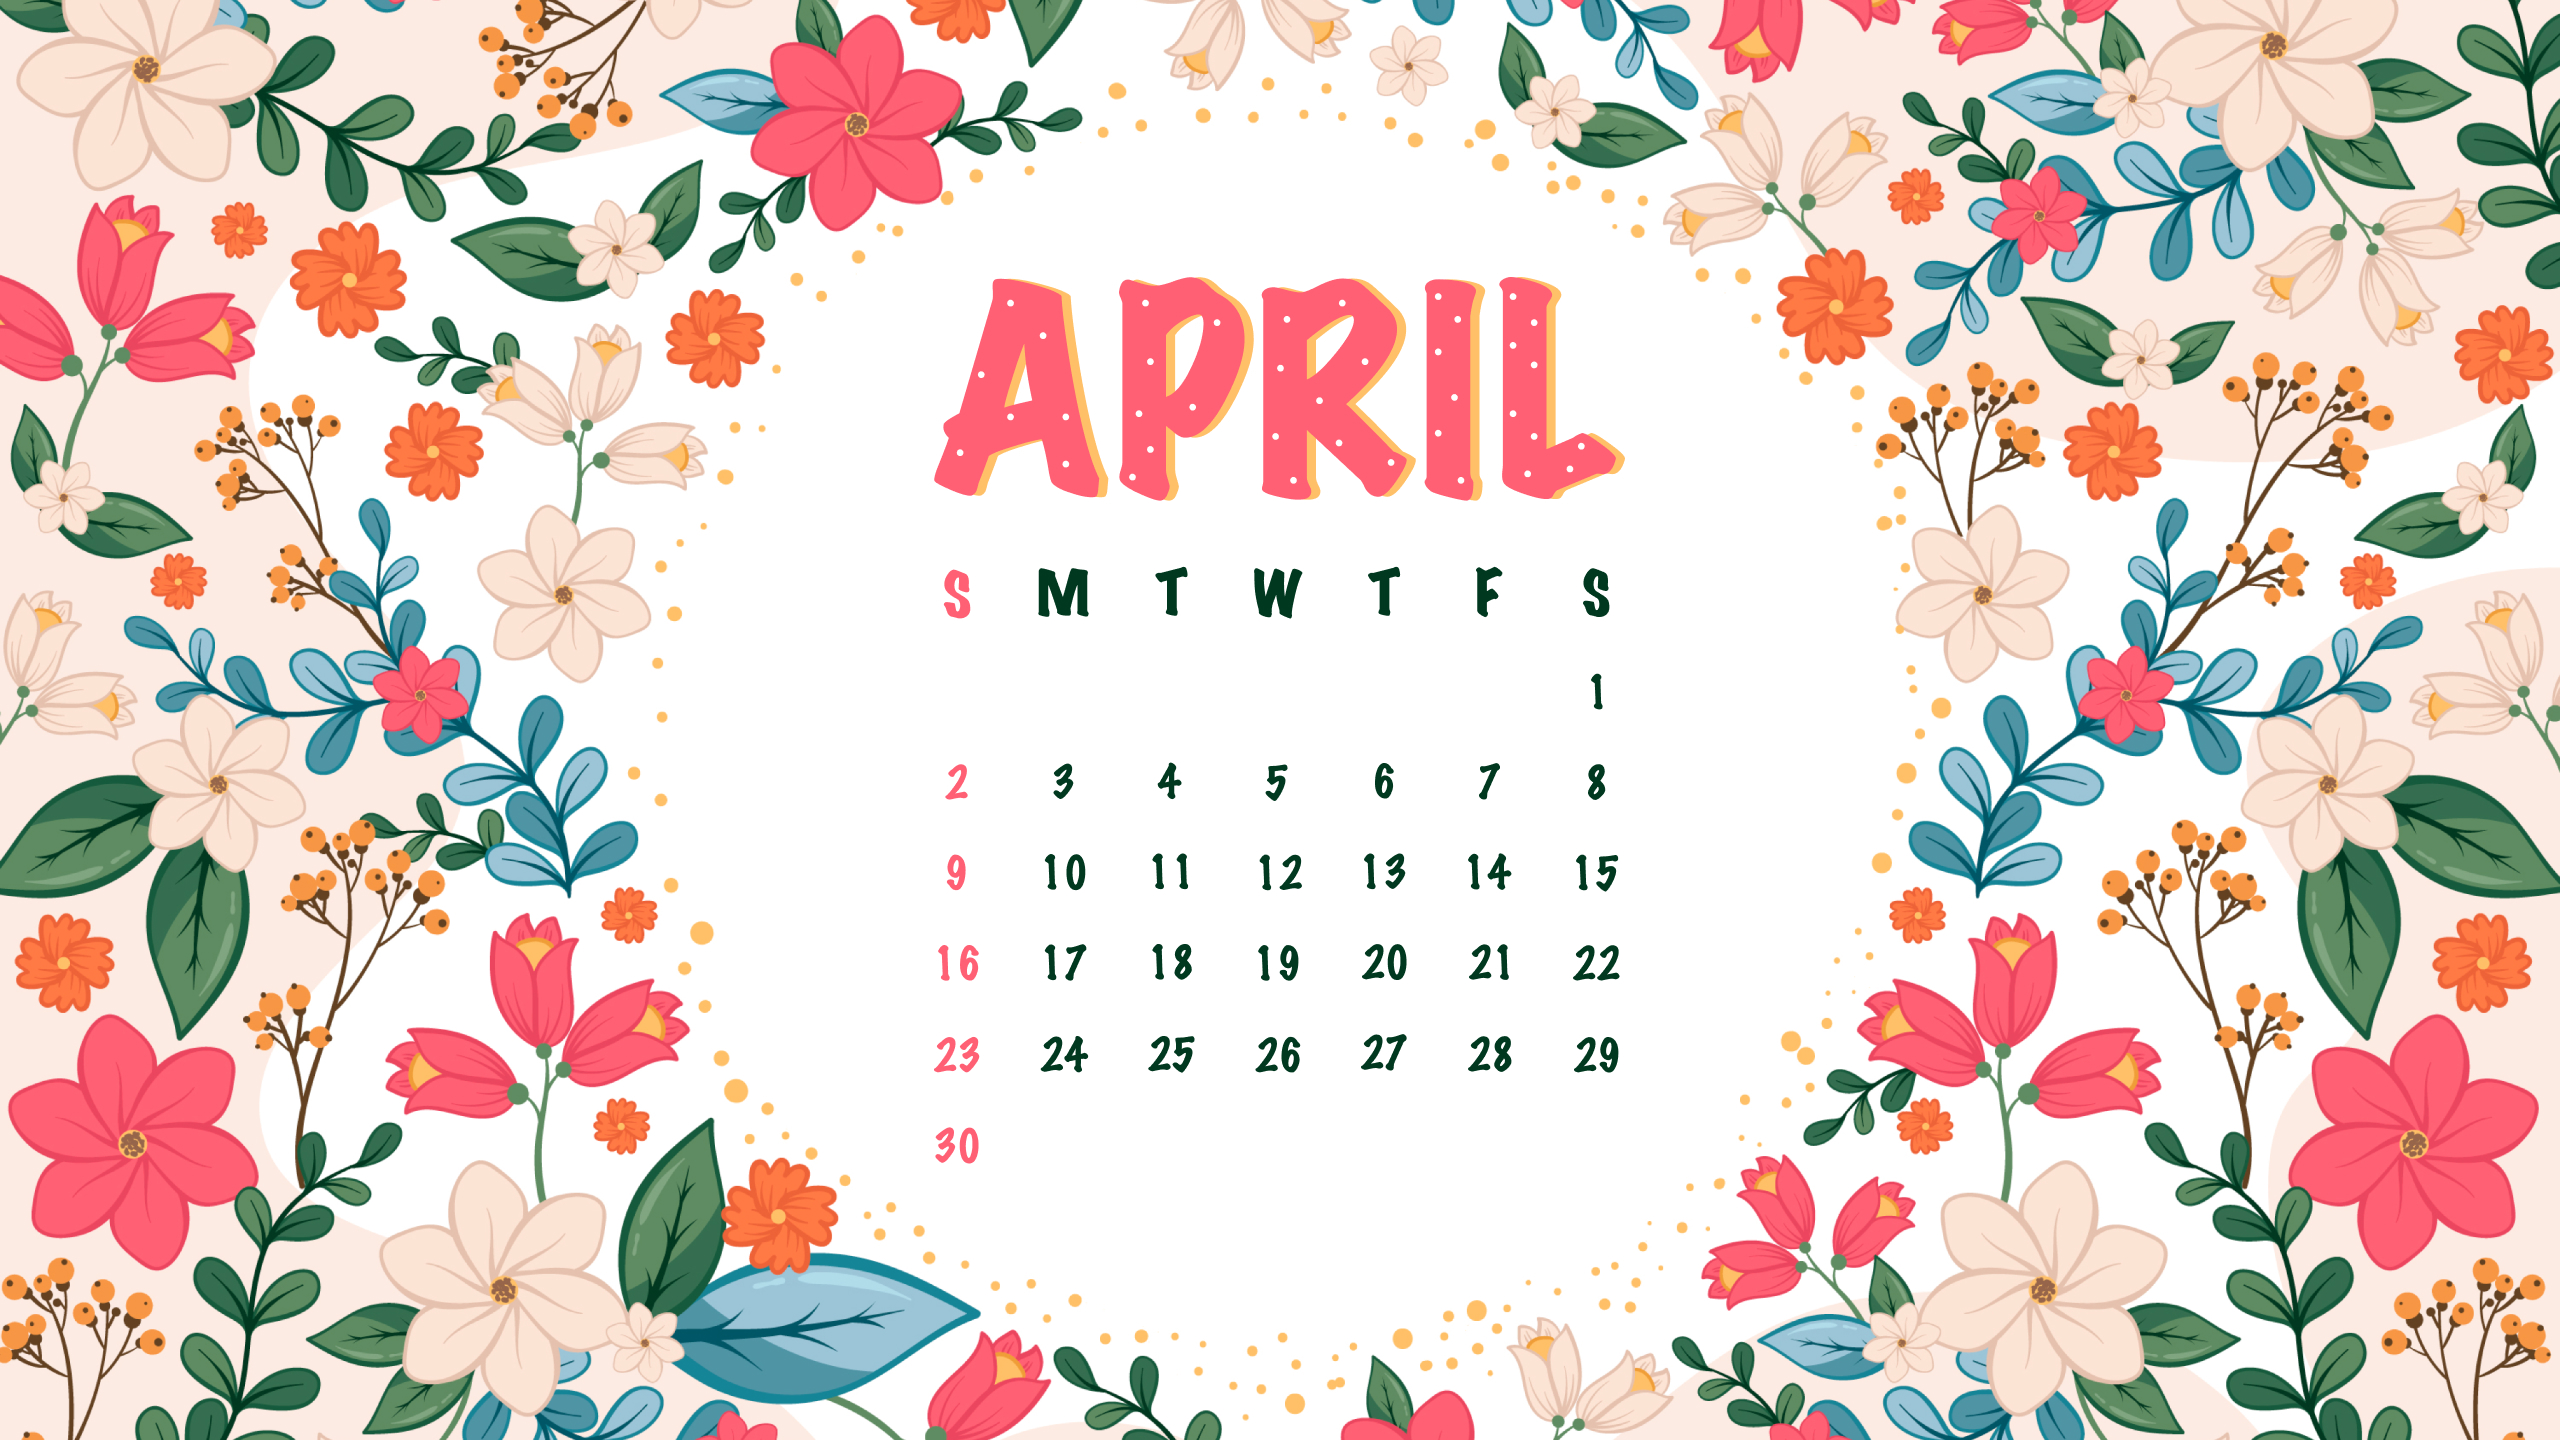 Calendar with flowers and leaves around it.